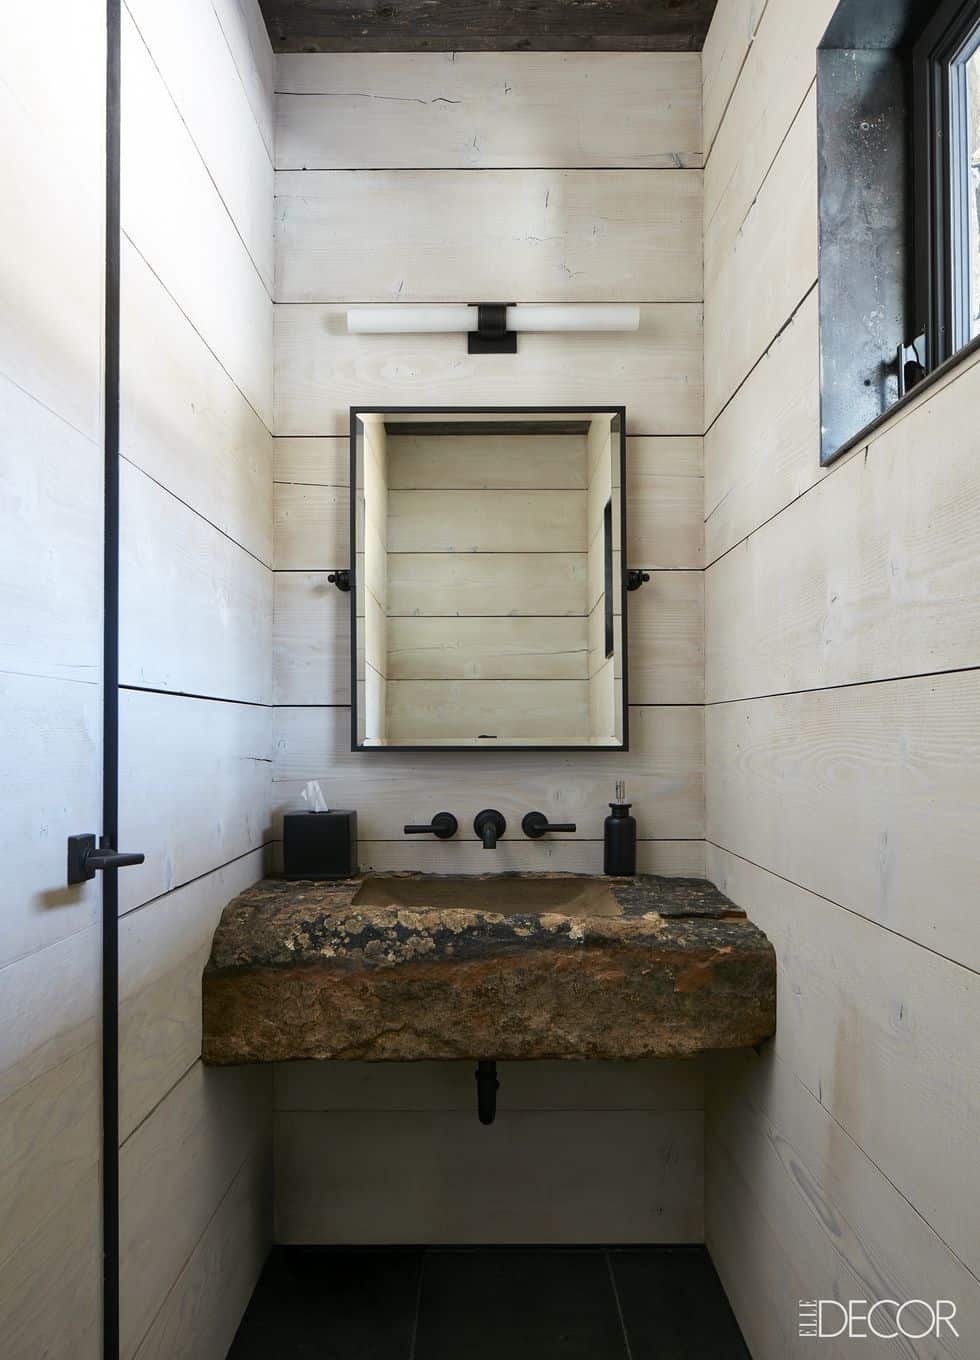 Bathroom with wooden walls and a raw natural stone sink.